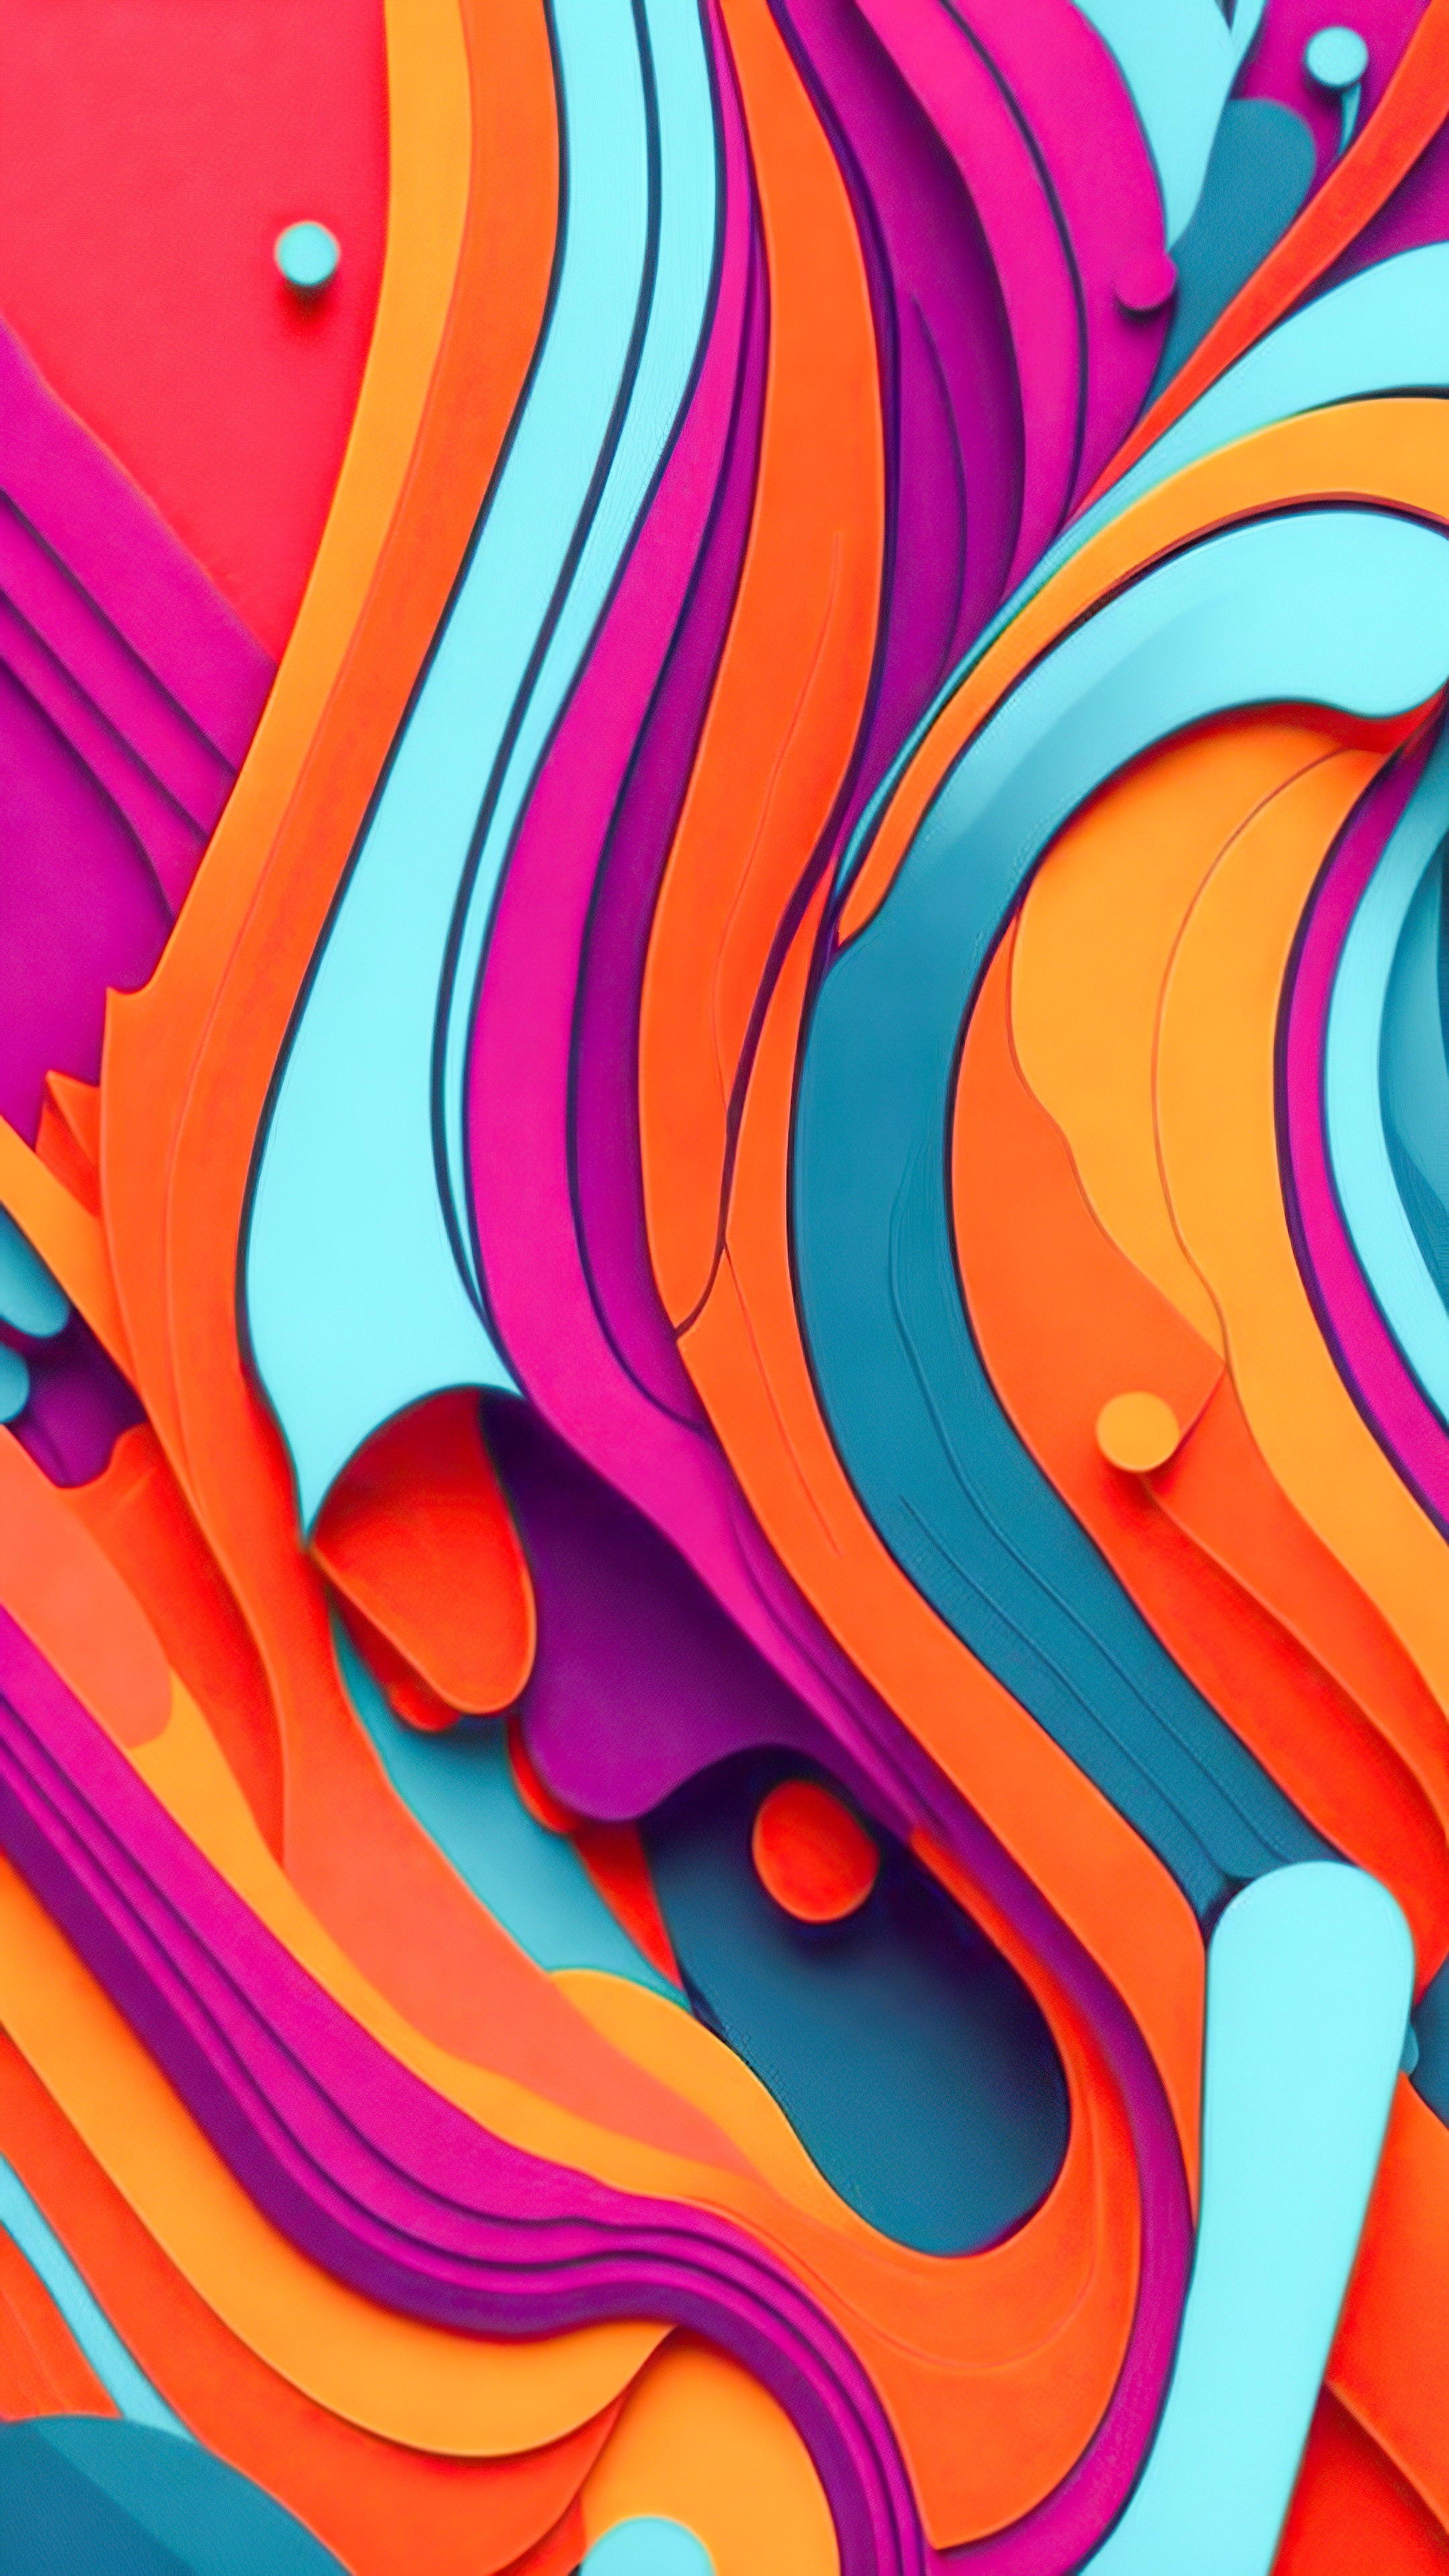 Elevate your visual experience with dynamic shapes and bold colors through our abstract phone wallpaper.